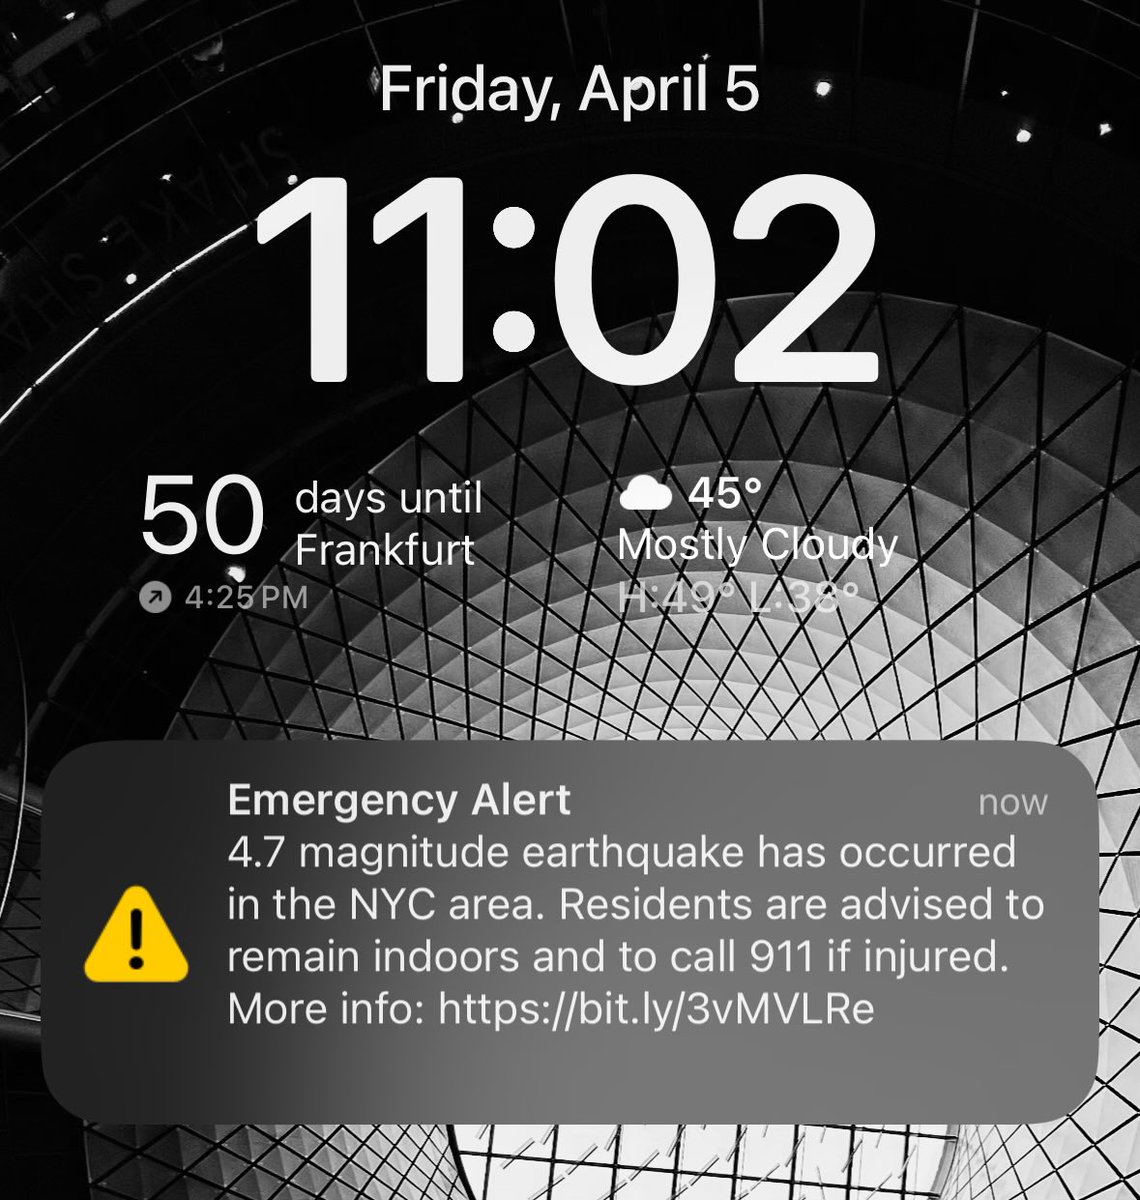 Taiwan: Emergency alert messages received before the shaking even begins NYC: Emergency alert message received 42 minutes after earthquake